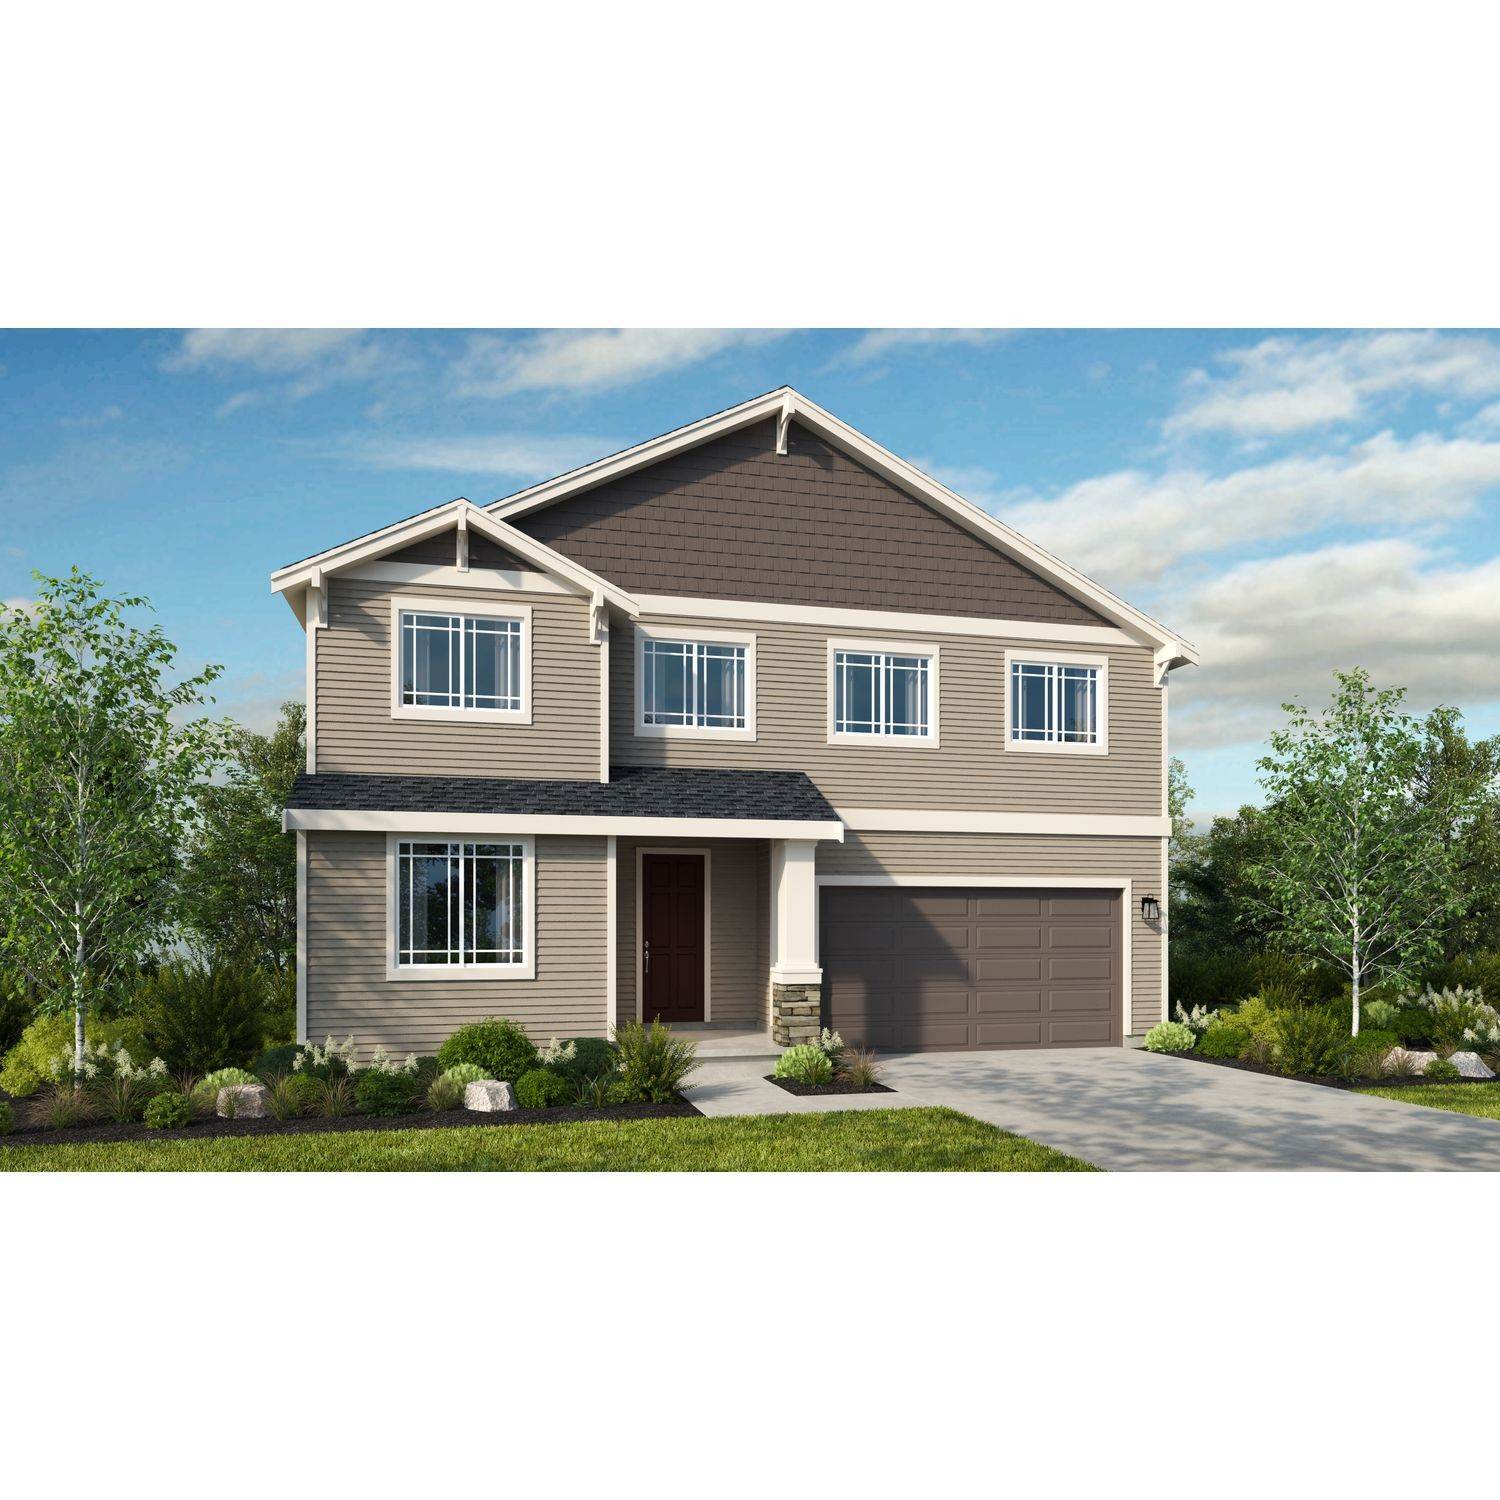 Single Family for Sale at Ridgeline At Bethany 14977 NW Minda Street, Portland, OR 97229